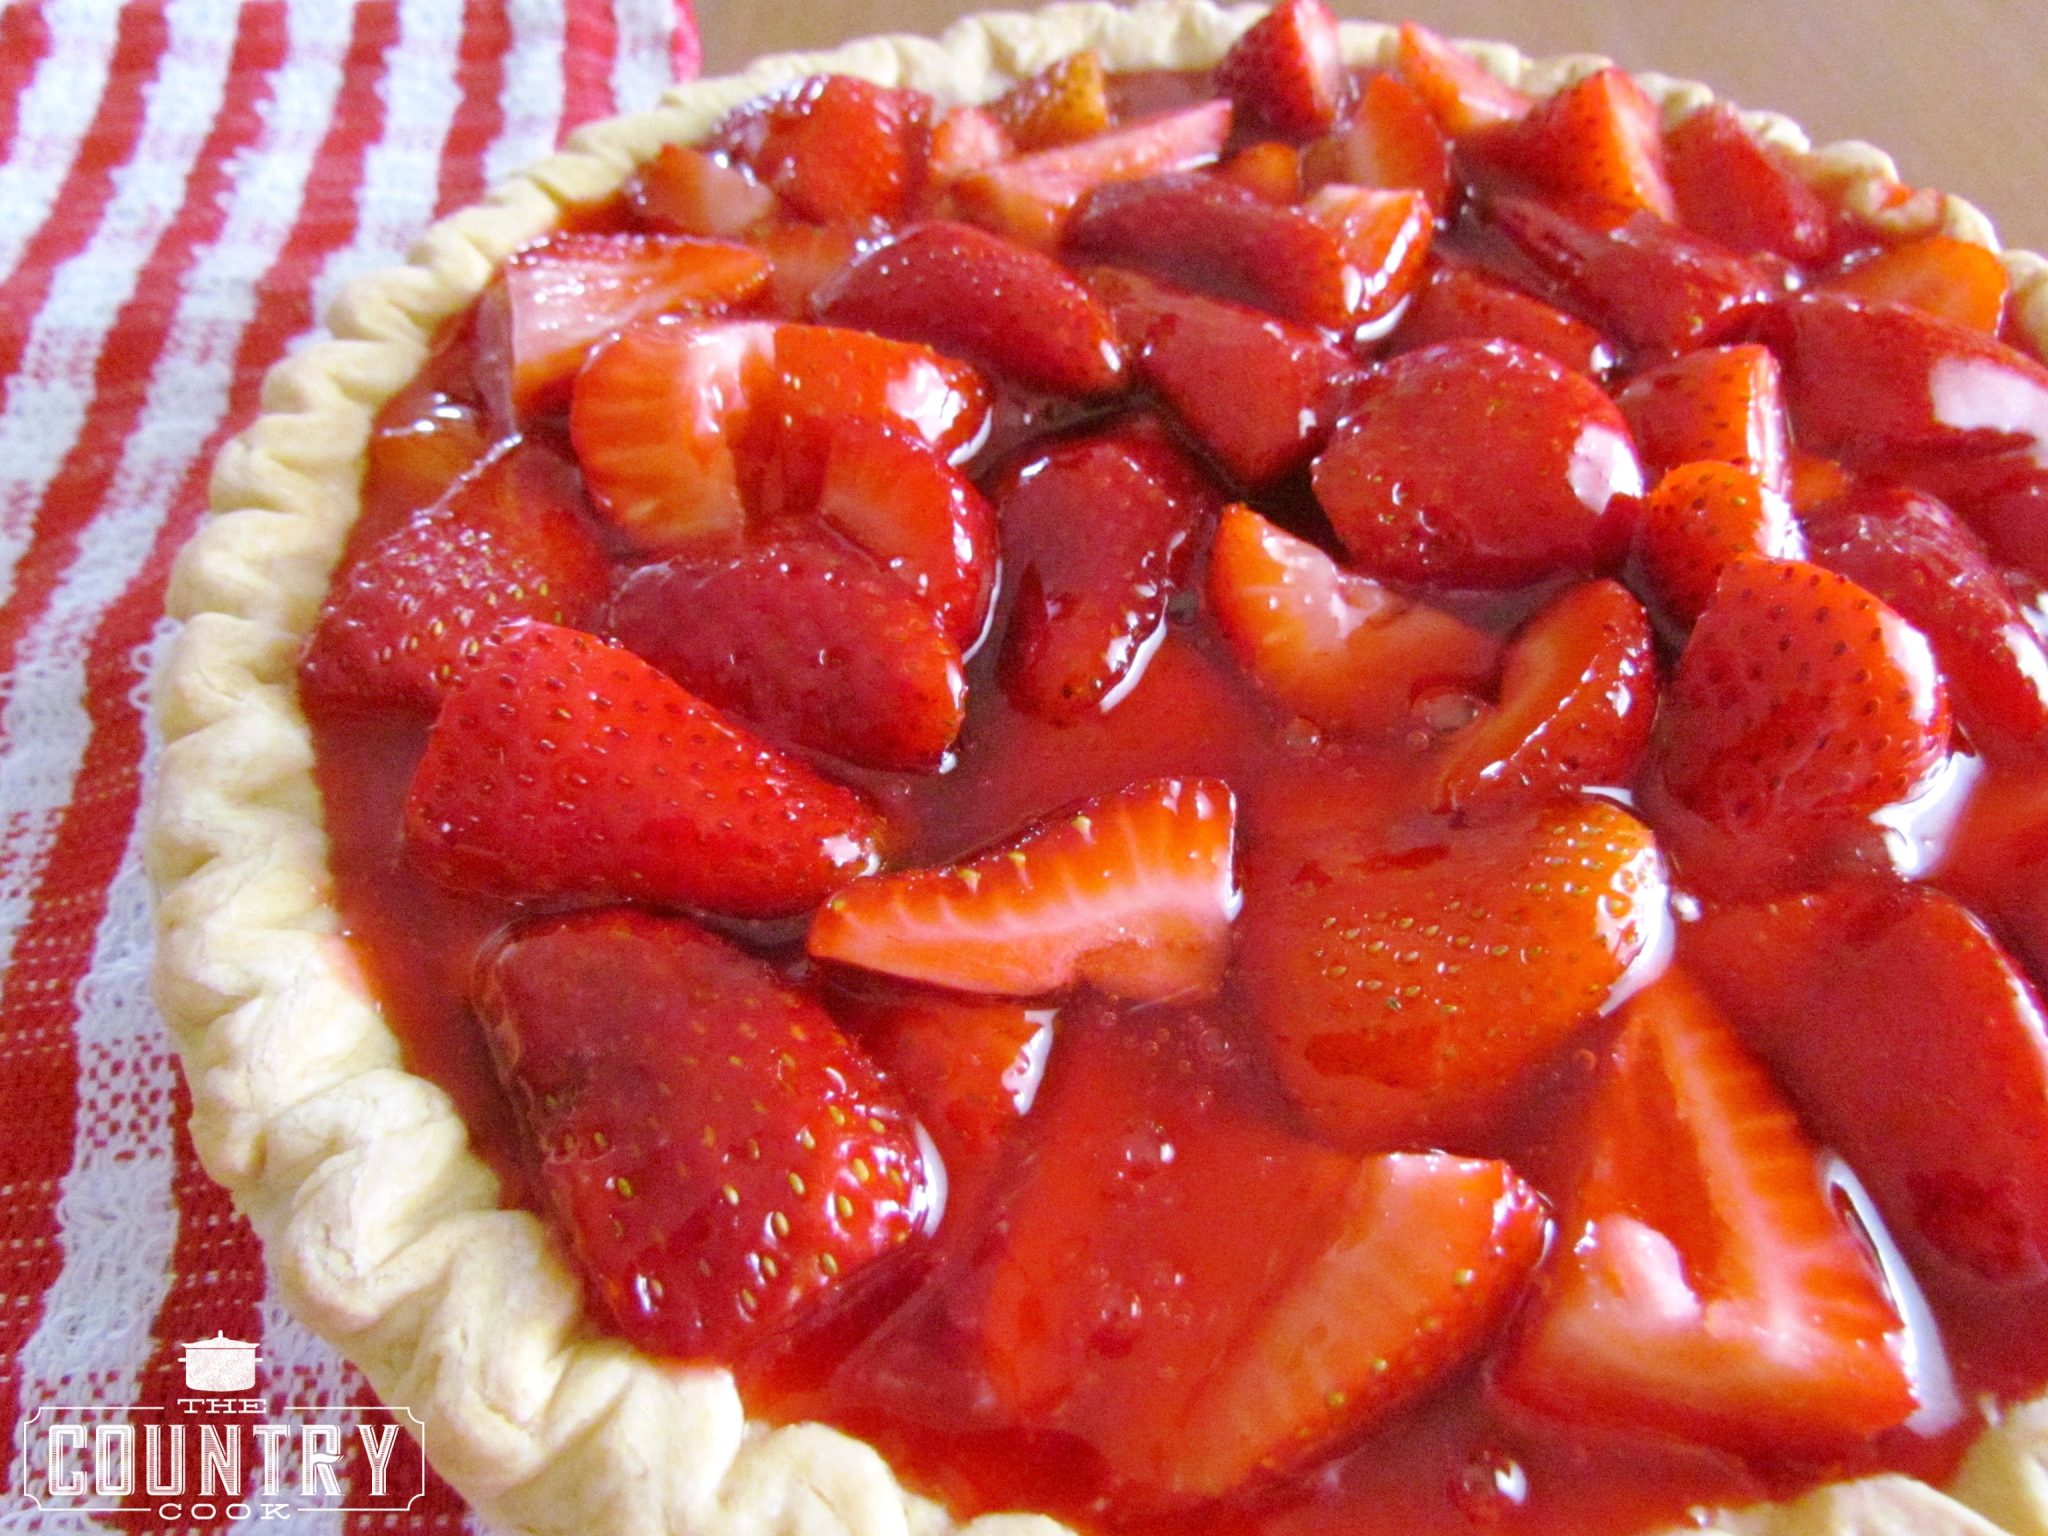 Shoney's Strawberry Pie - The Country Cook